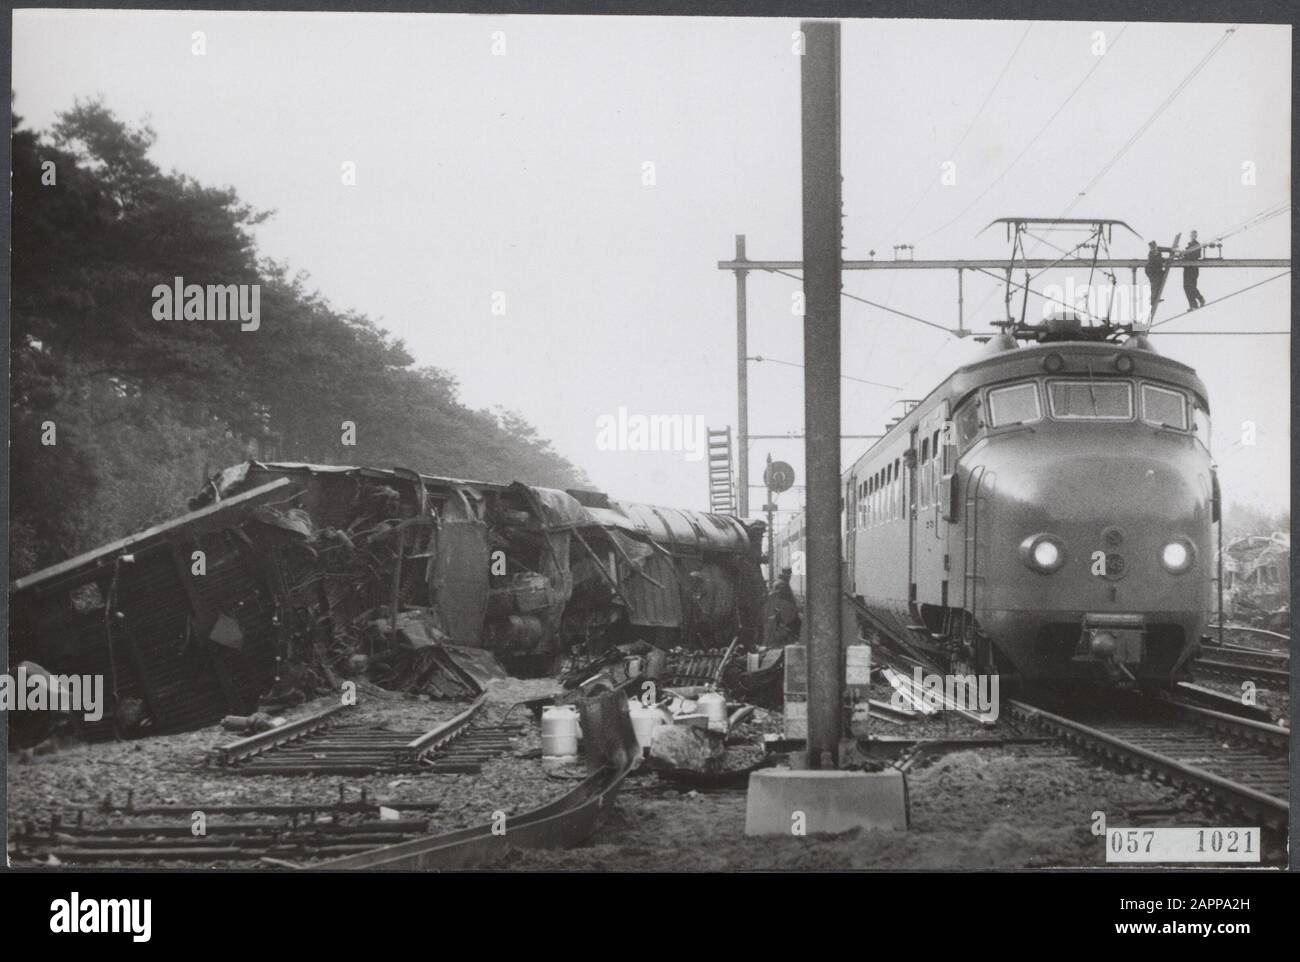 Train accident at Woensel. A day later. The first test train runs over the cleared railway section, along the still on the side destroyed railway wagons Date: 13 August 1957 Location: Eindhoven, Noord-Brabant, Woensel Keywords: accidents, railways, trains Stock Photo